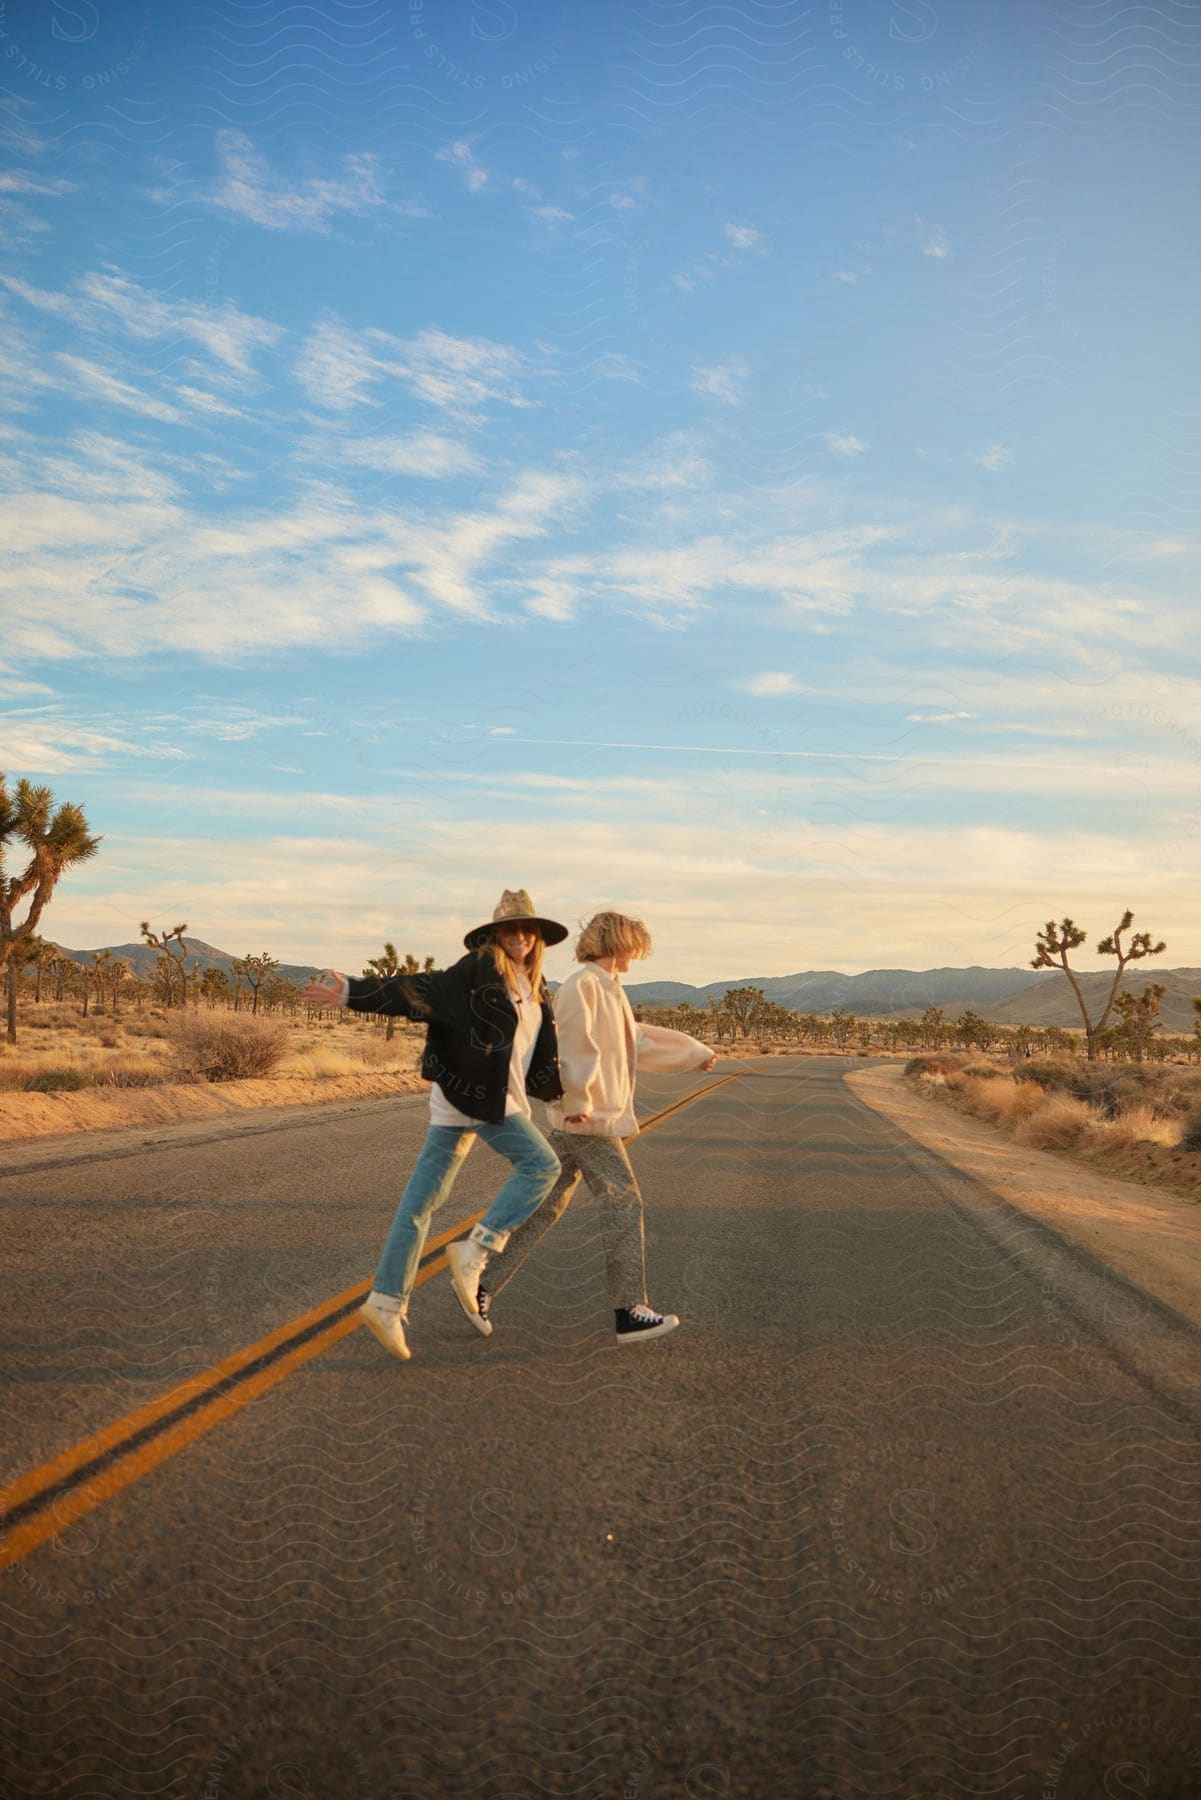 Two people walking across a desert road with mountains in the distance